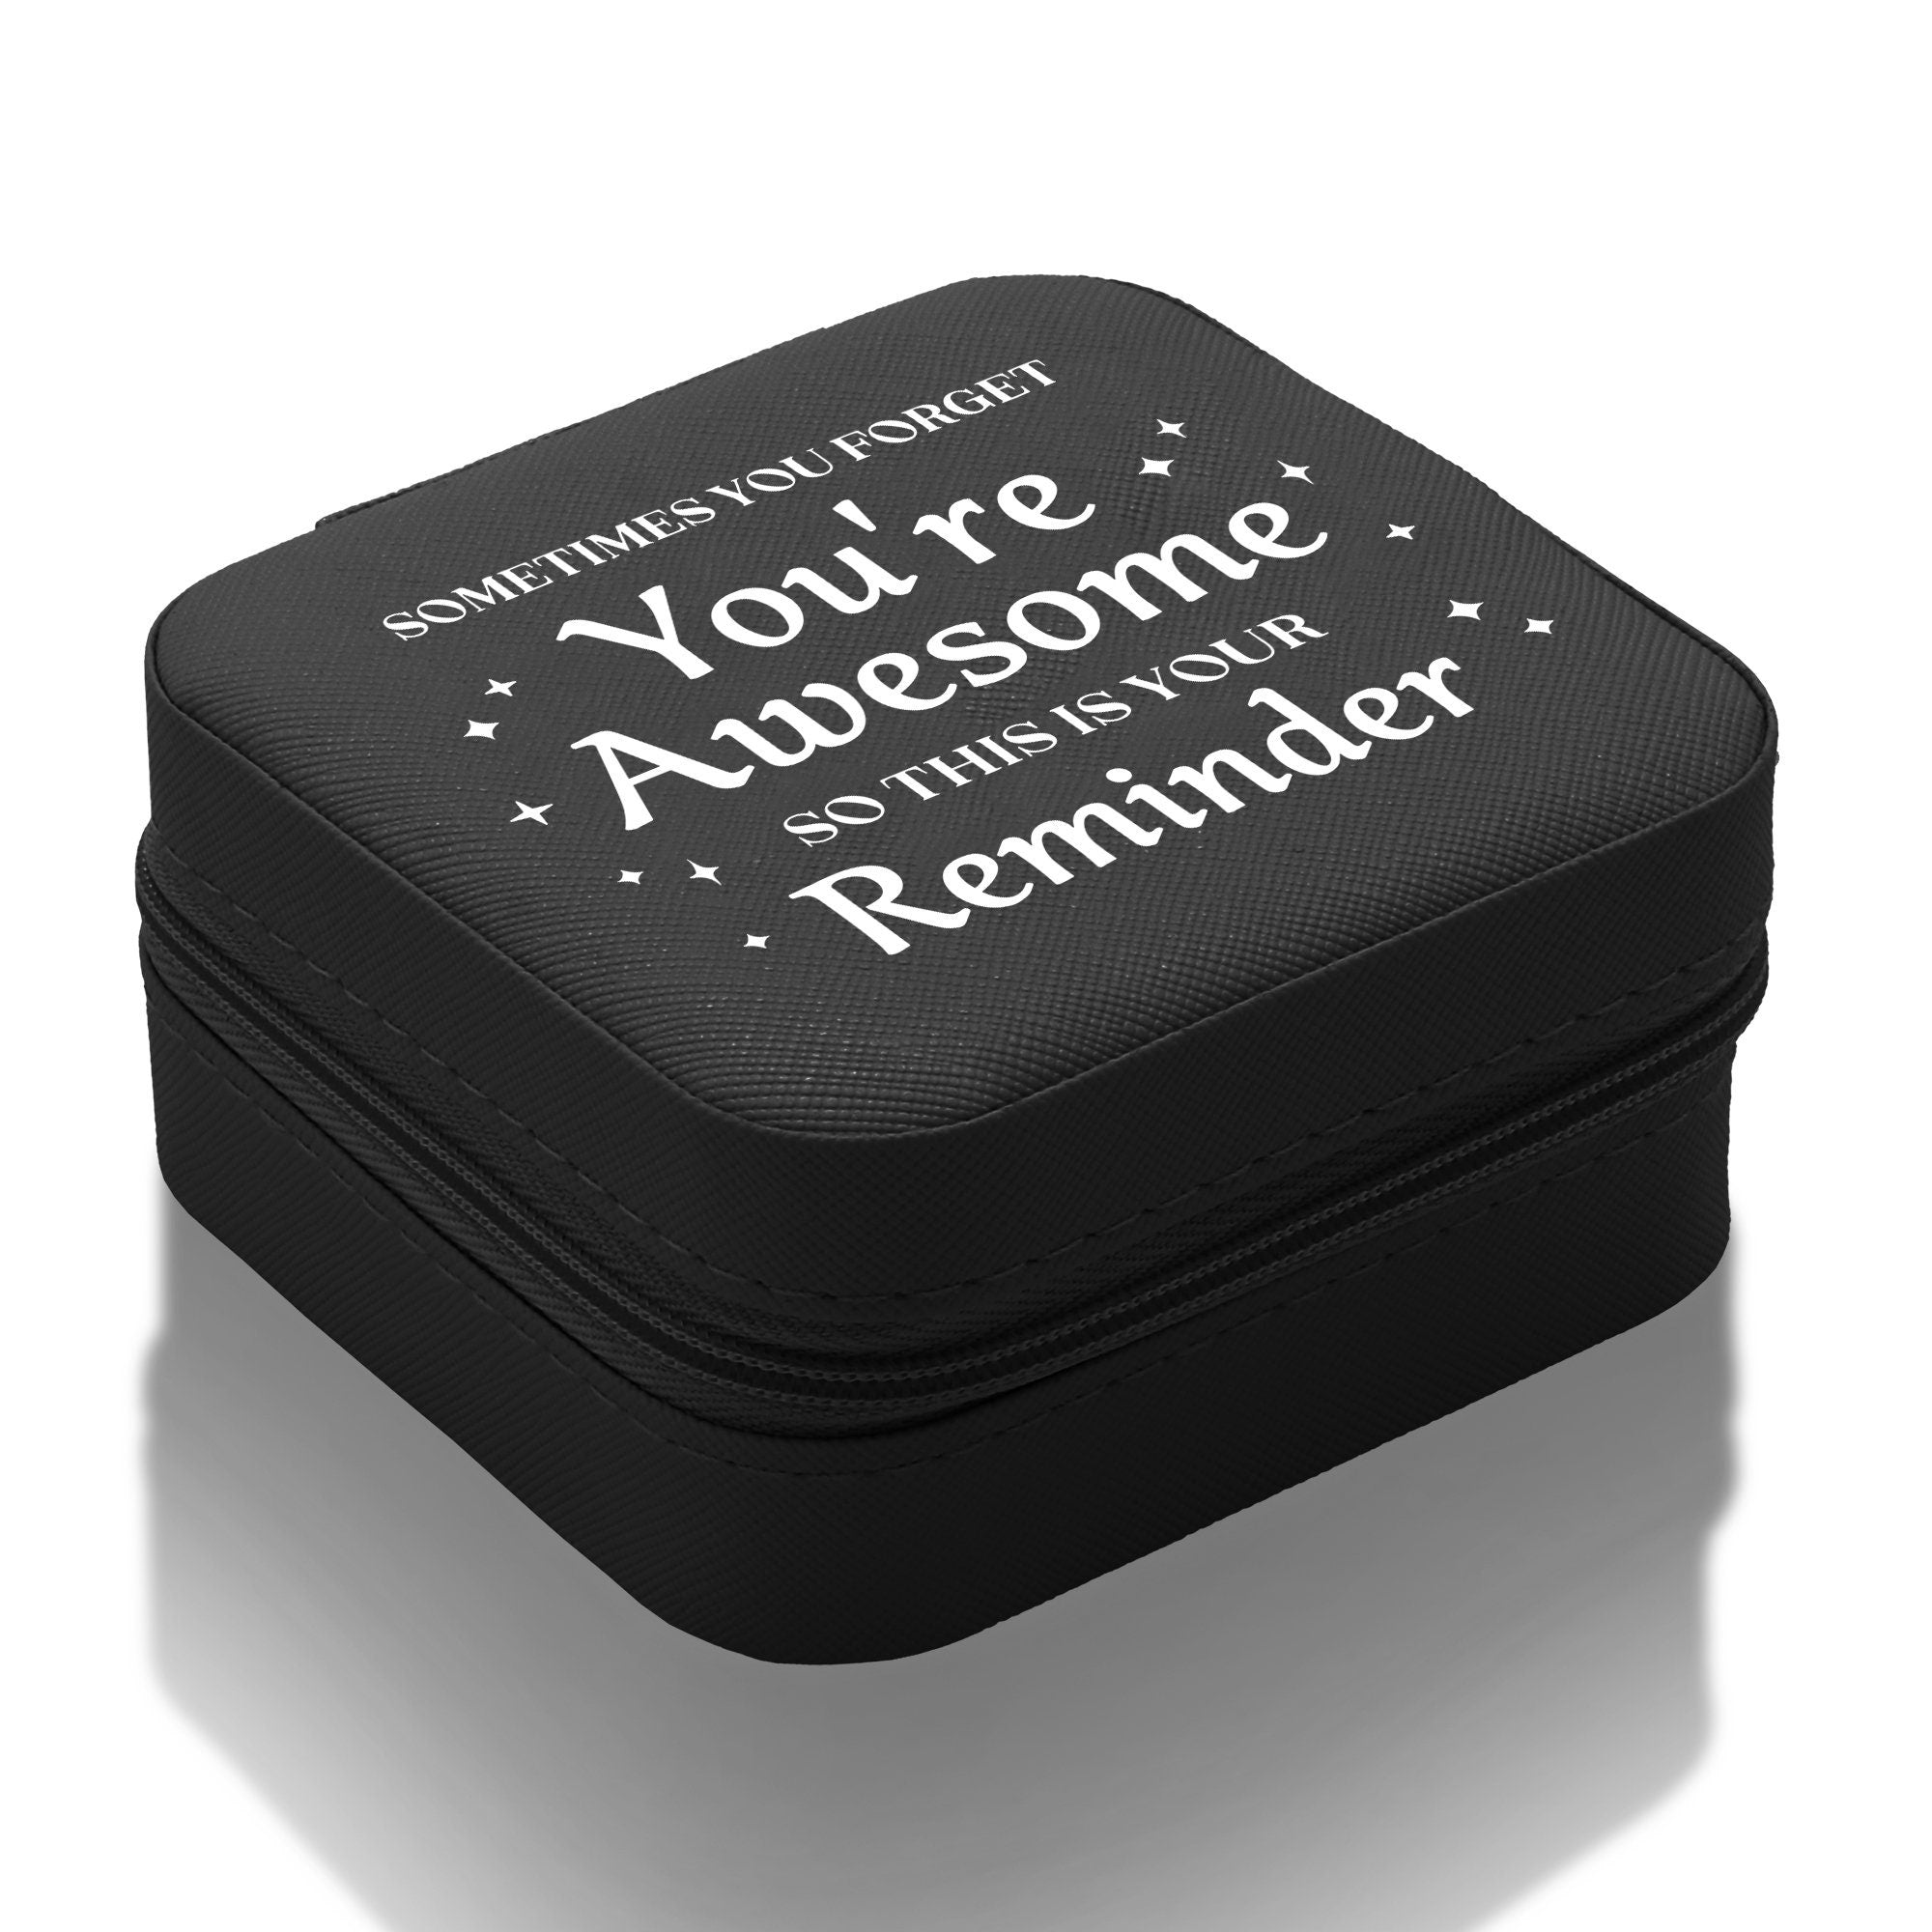 a small black box with a message on it